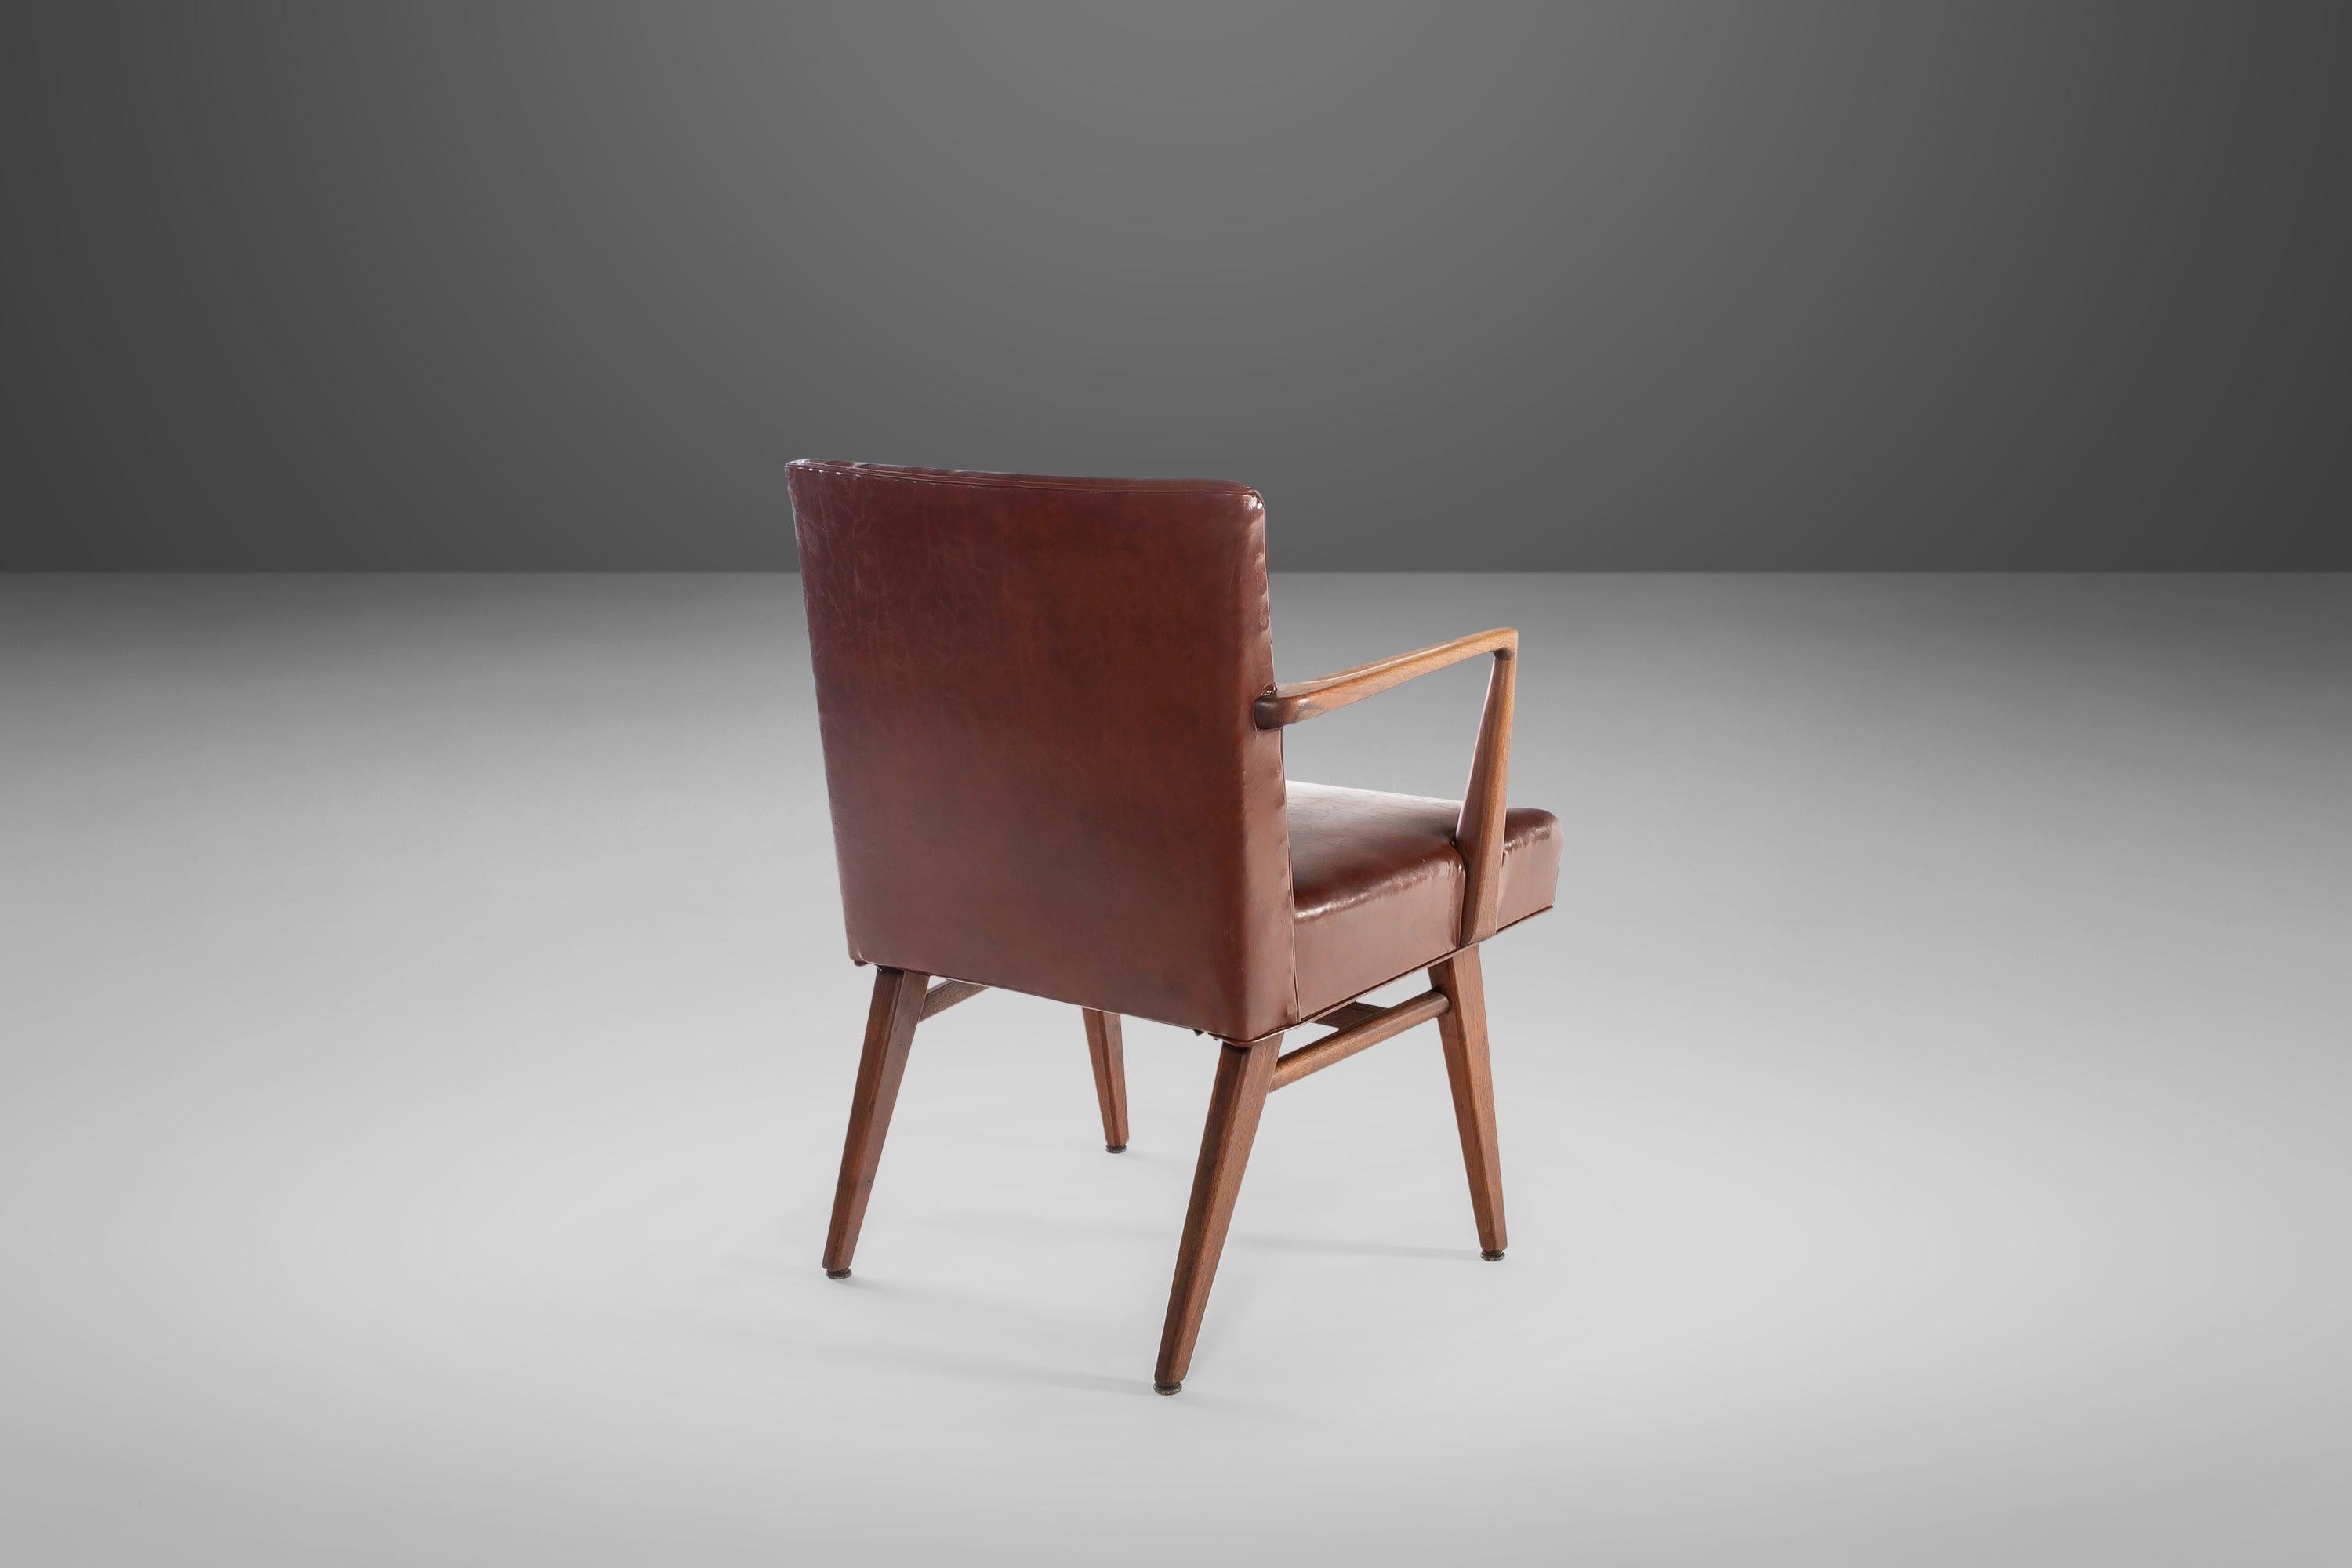 American Early Jens Risom Model 108 Arm Chair for Risom Designs in Walnut, USA, c. 1950s For Sale